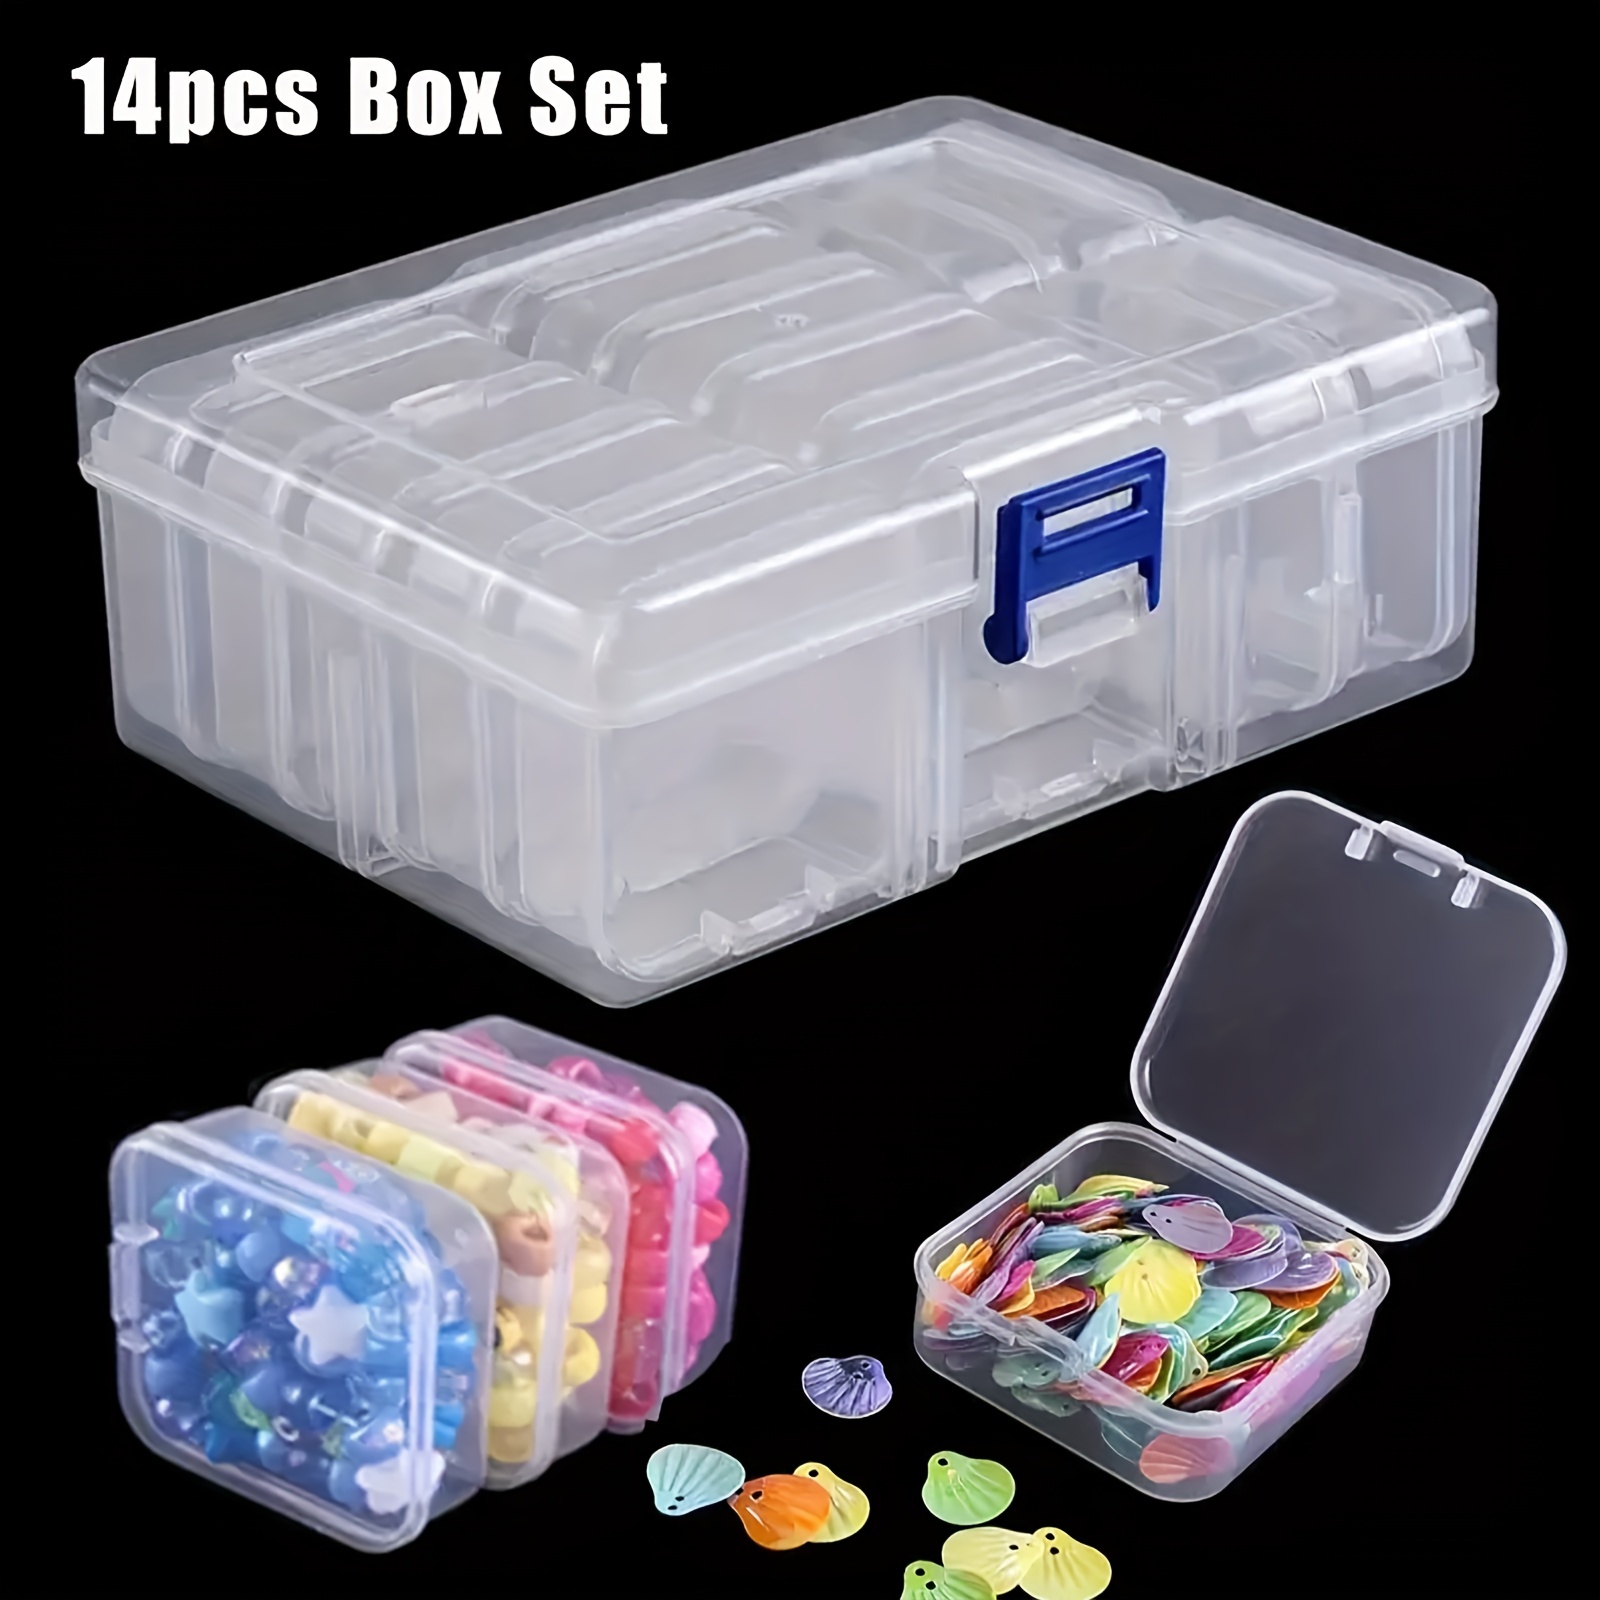 GMMGLT 42pcs Diamond Painting Drill Storage Container, Beads Organizer Storage Case, Jewelry Drill Storage Boxes, Plastic Organizer Box, Organizer Box for